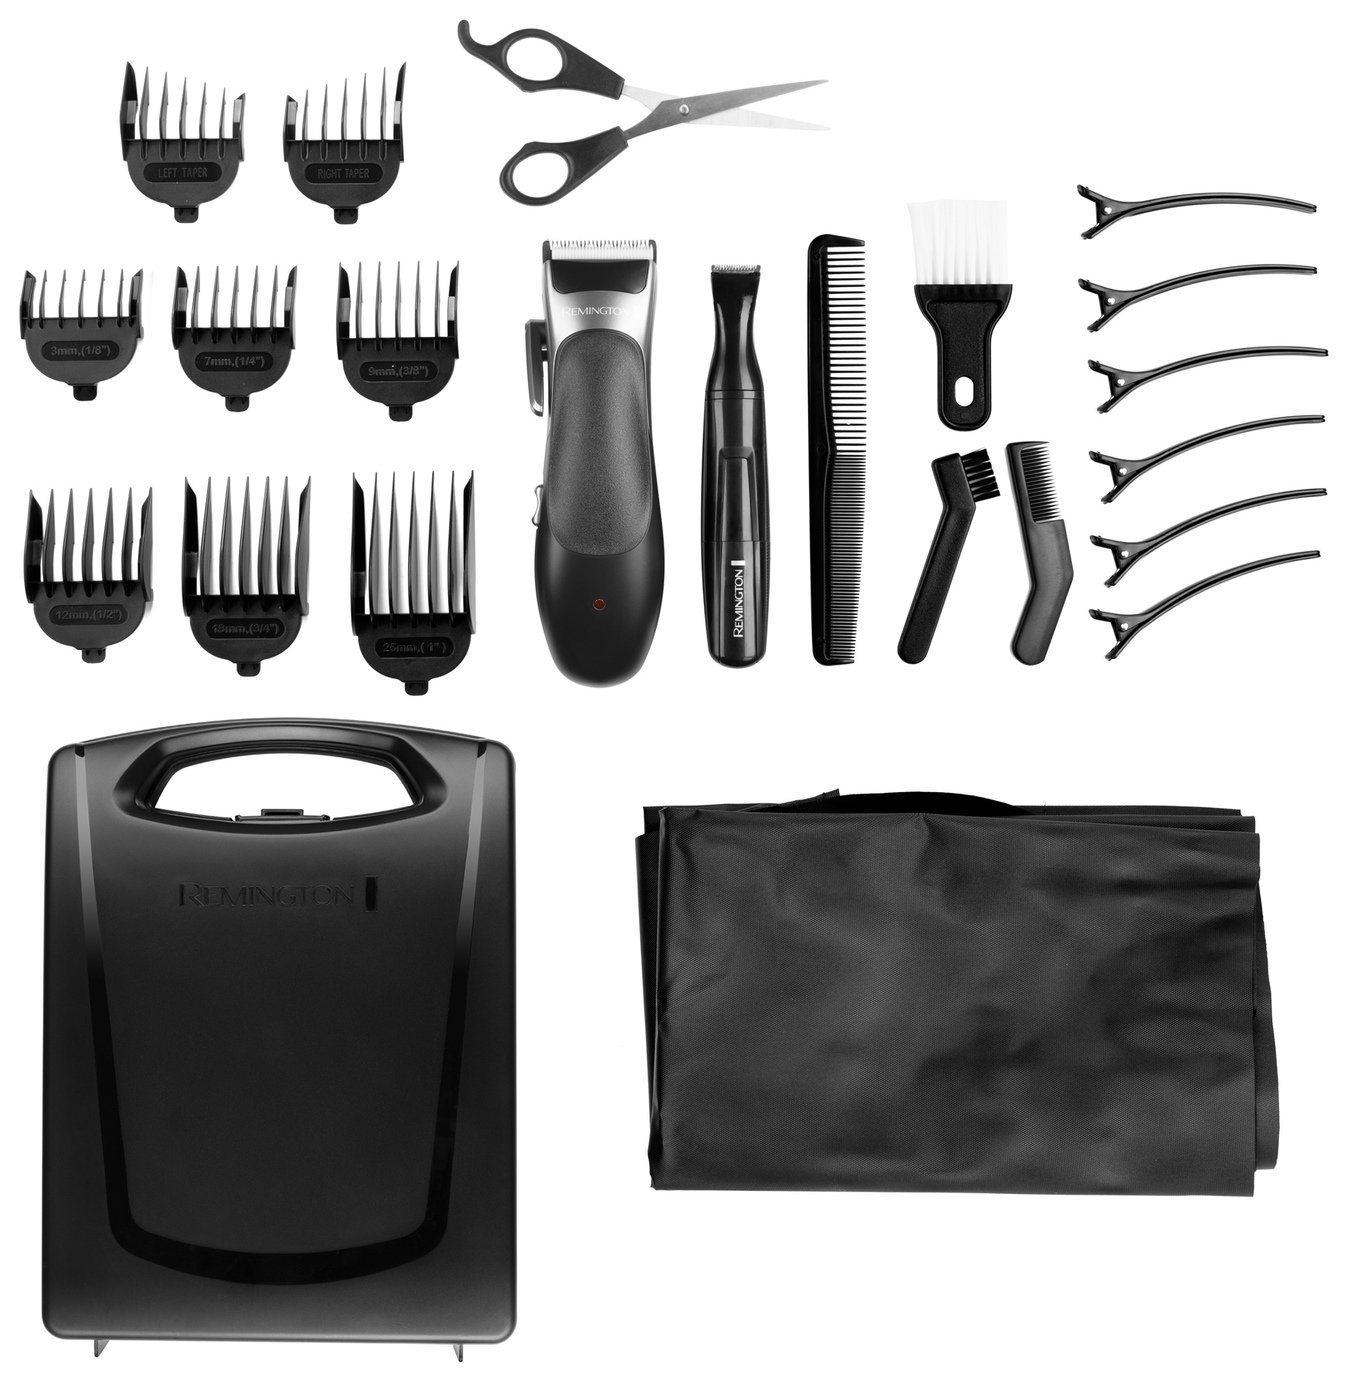 remington stylist hair clippers